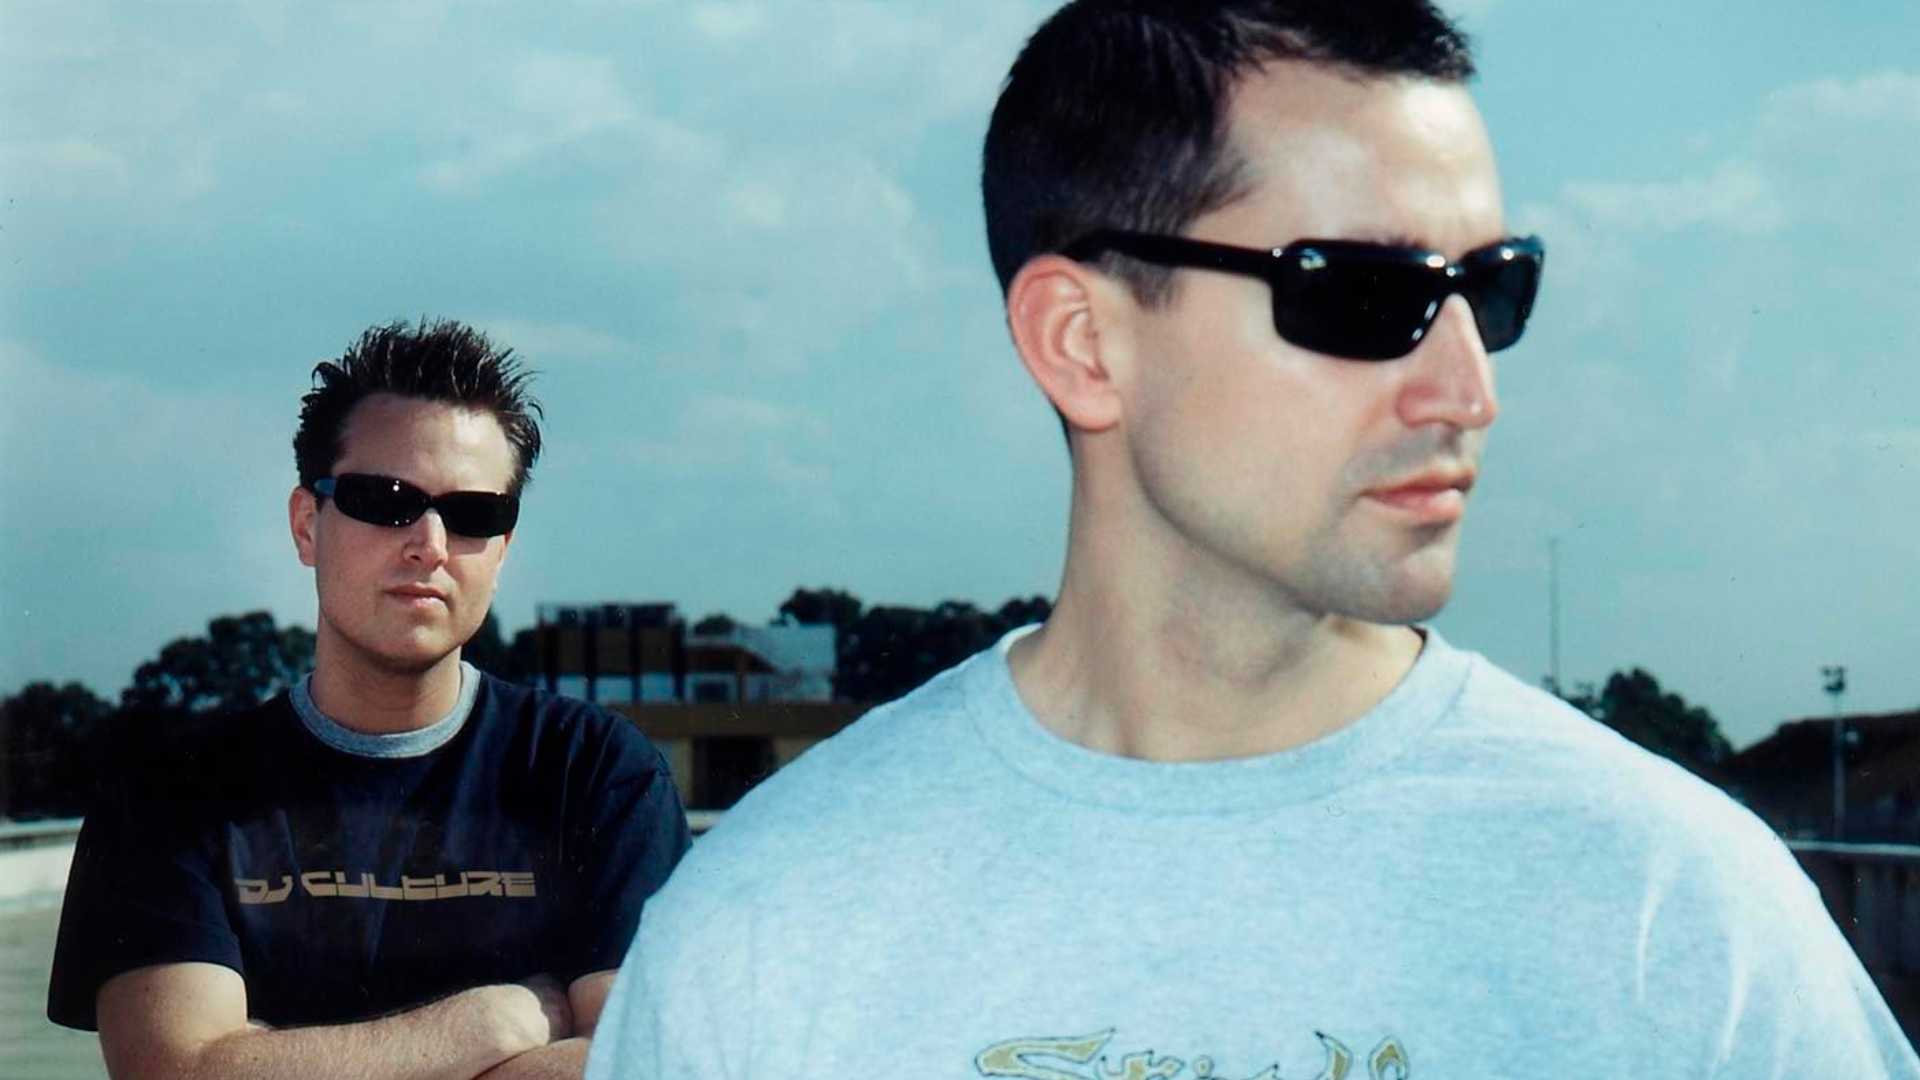 Blank & Jones celebrate the 25th anniversary of Cream & In Da Mix with limited Vinyl